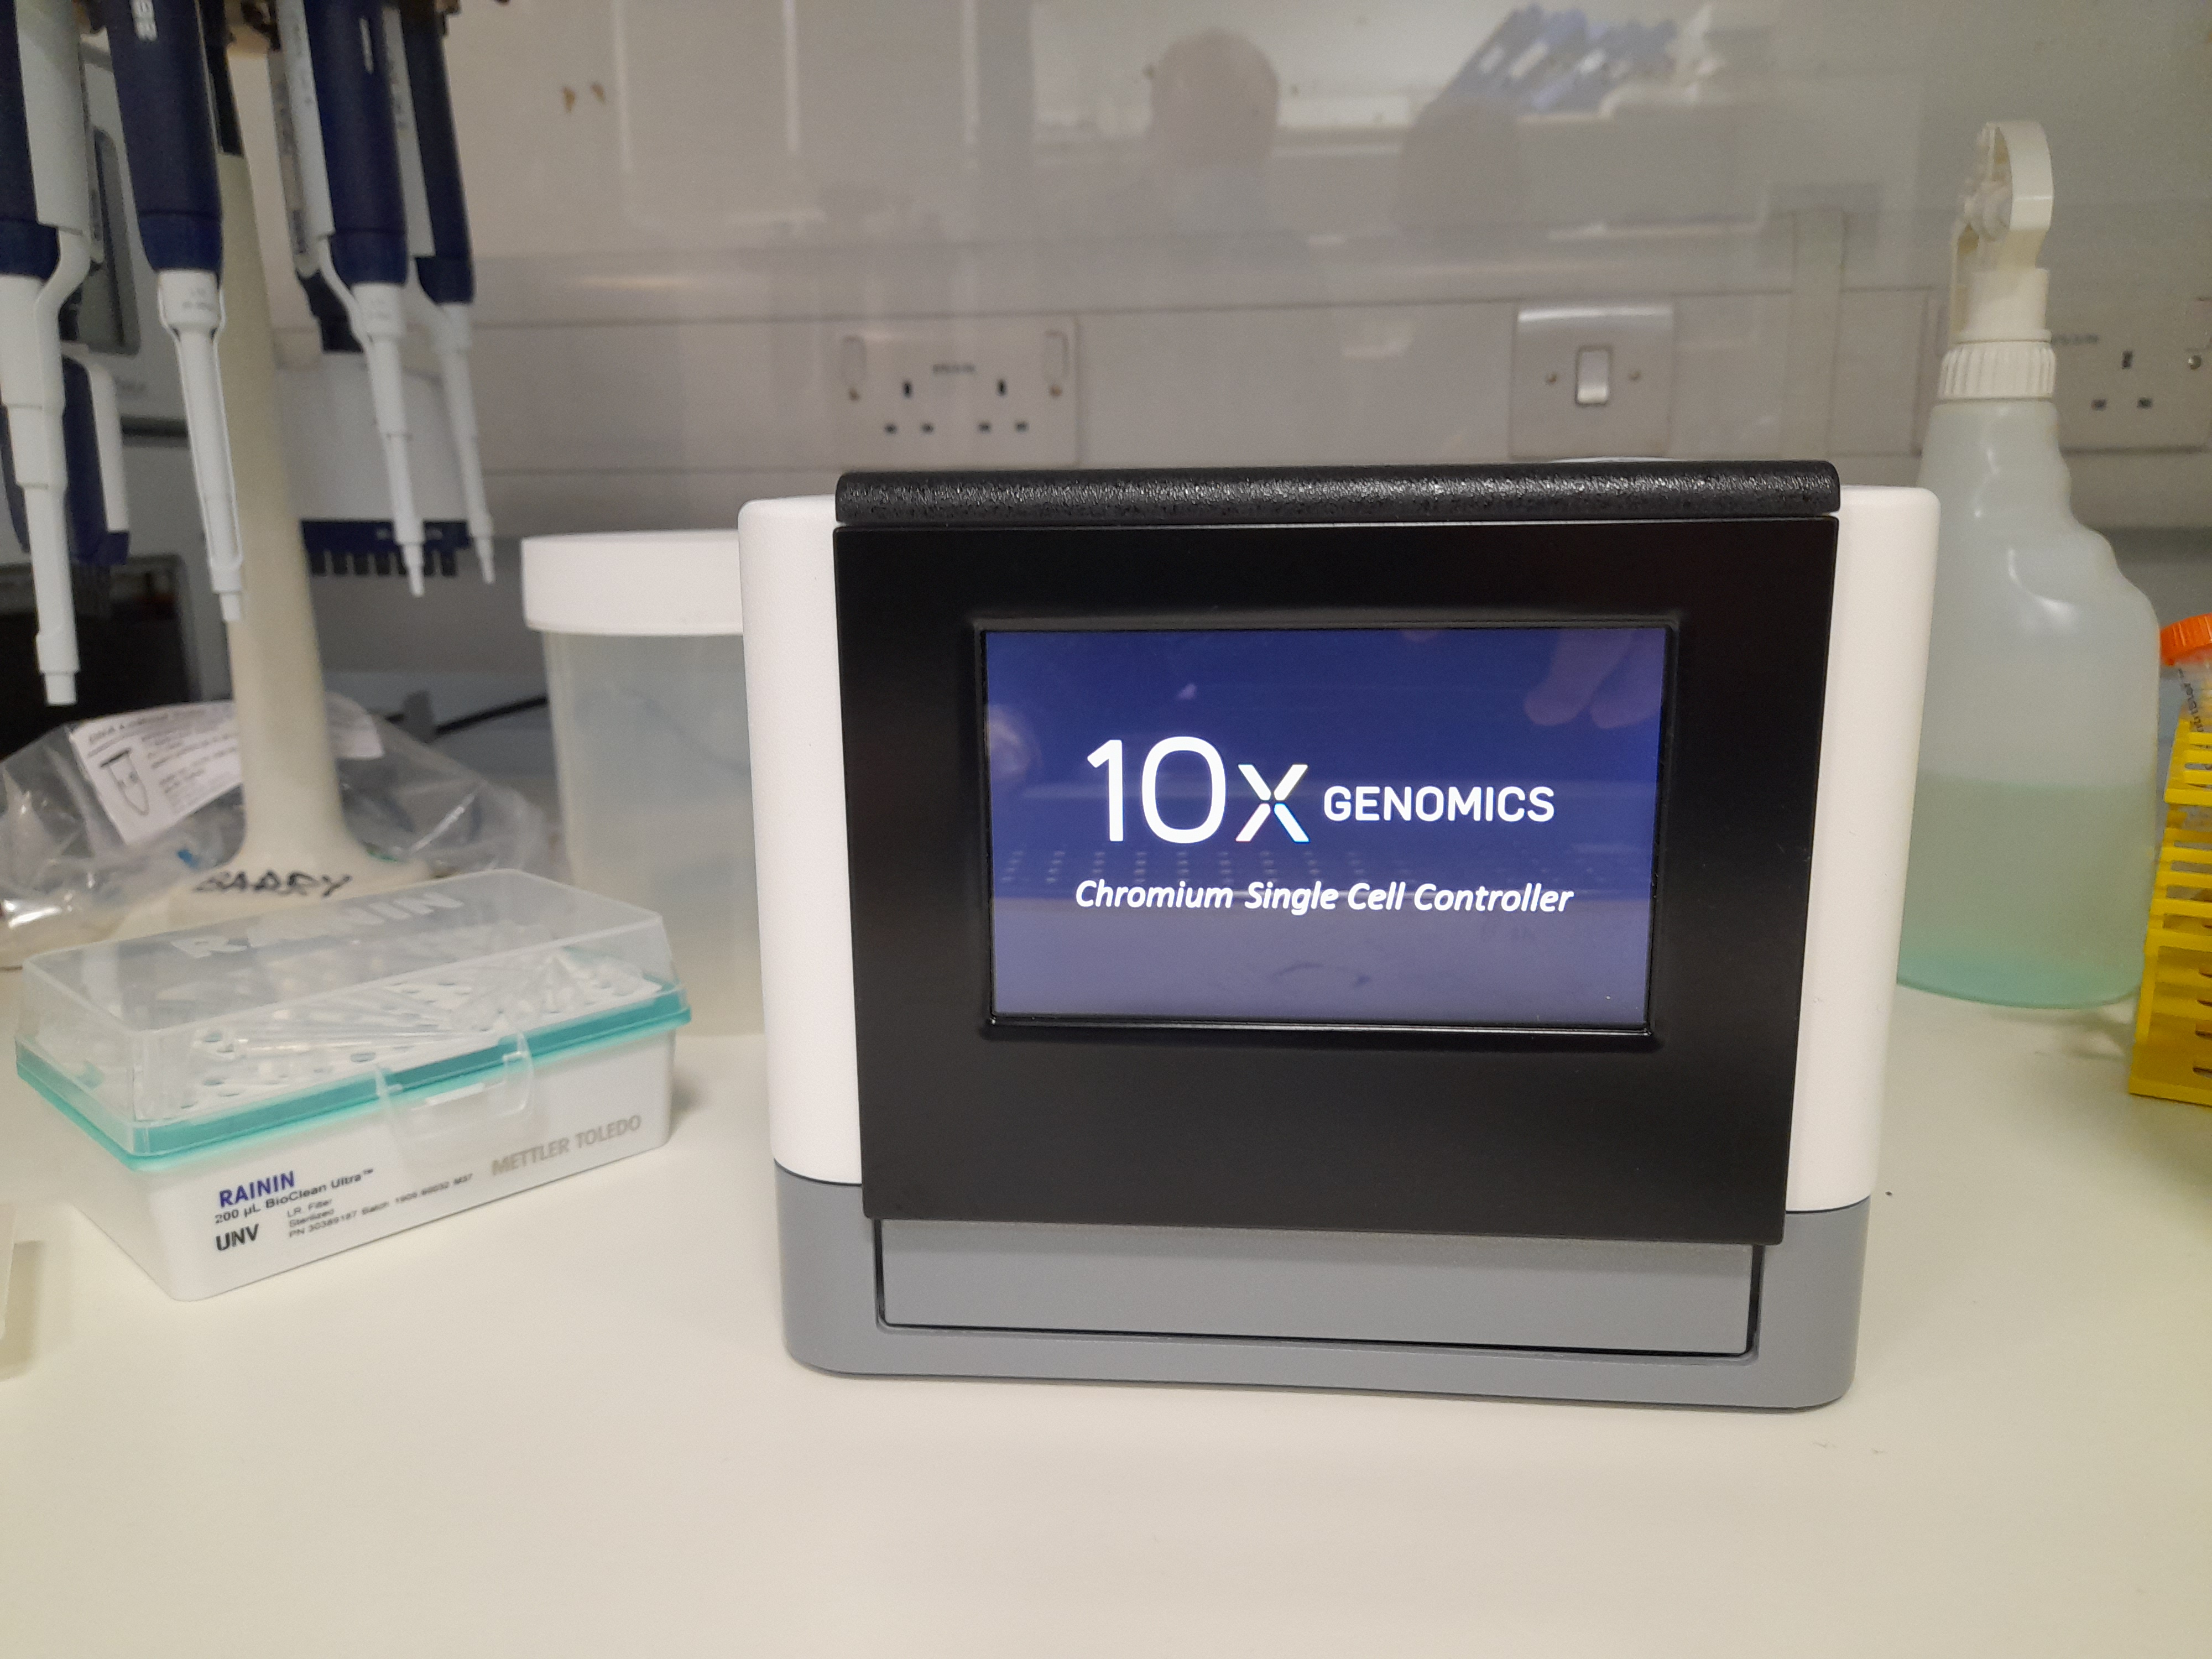 Image showing the chromium controller for single cell experiments